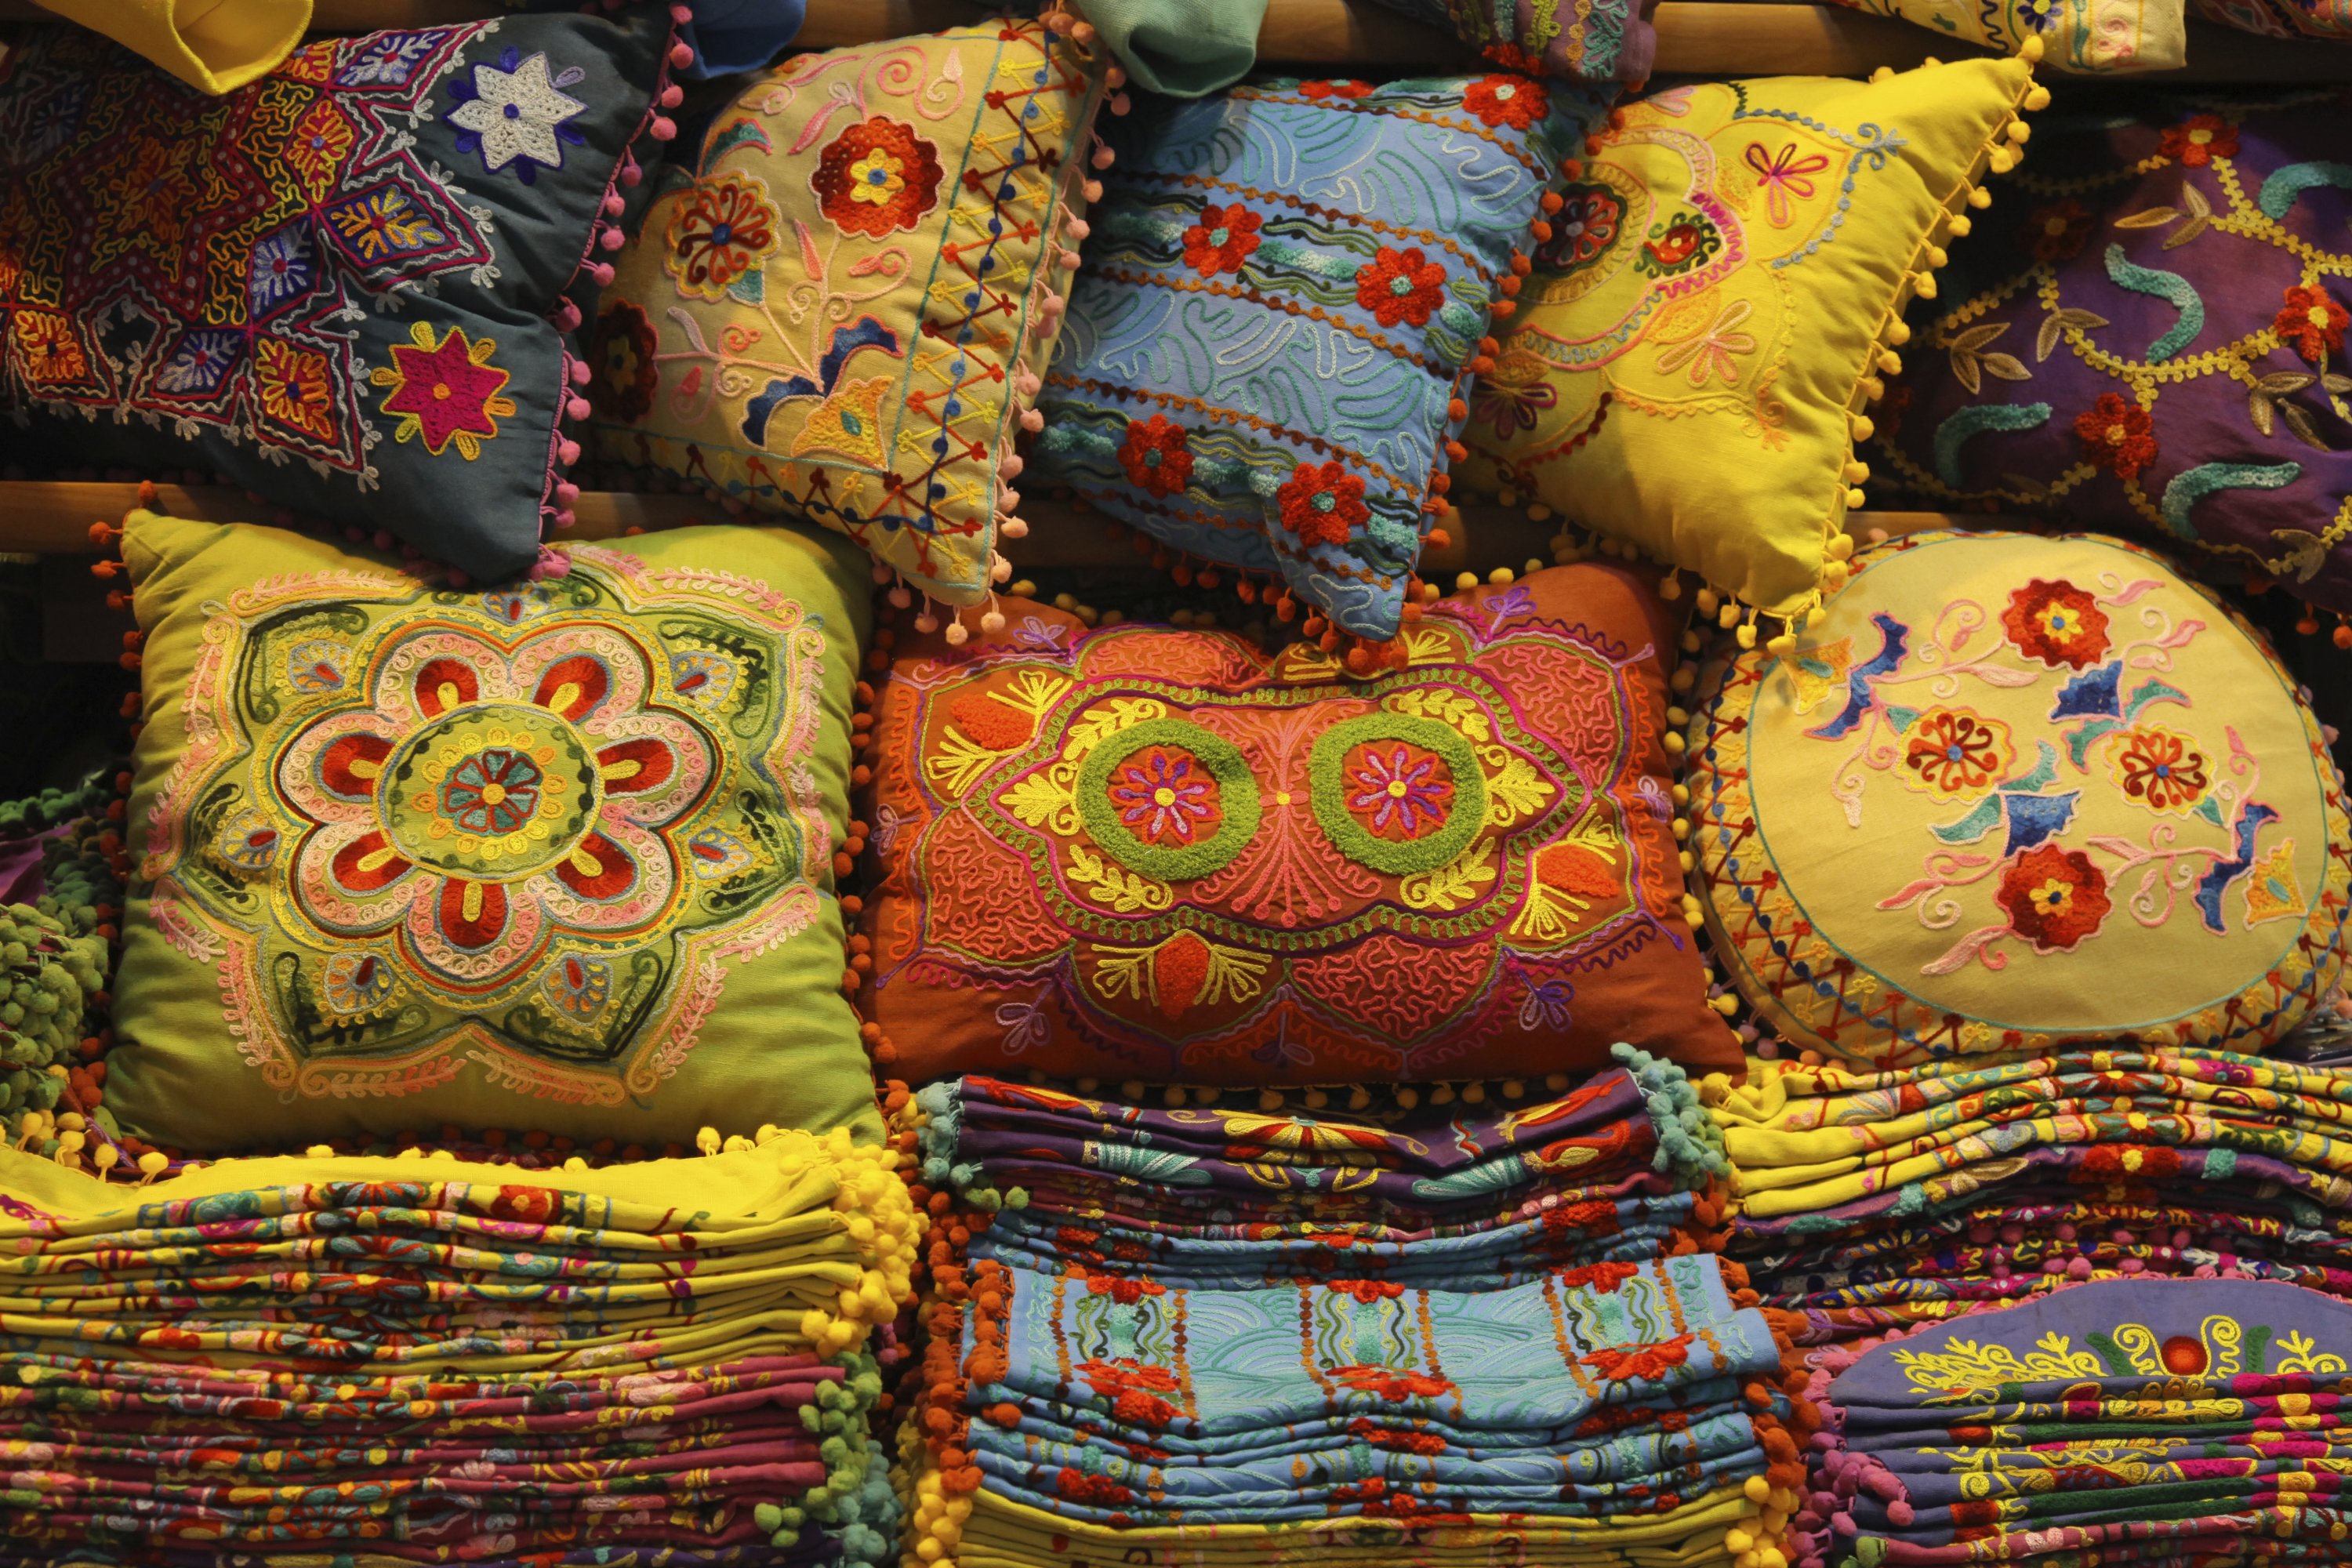 Turkish embroidered pillowcases in the Grand Bazaar in Istanbul, Turkey. (Getty Images)